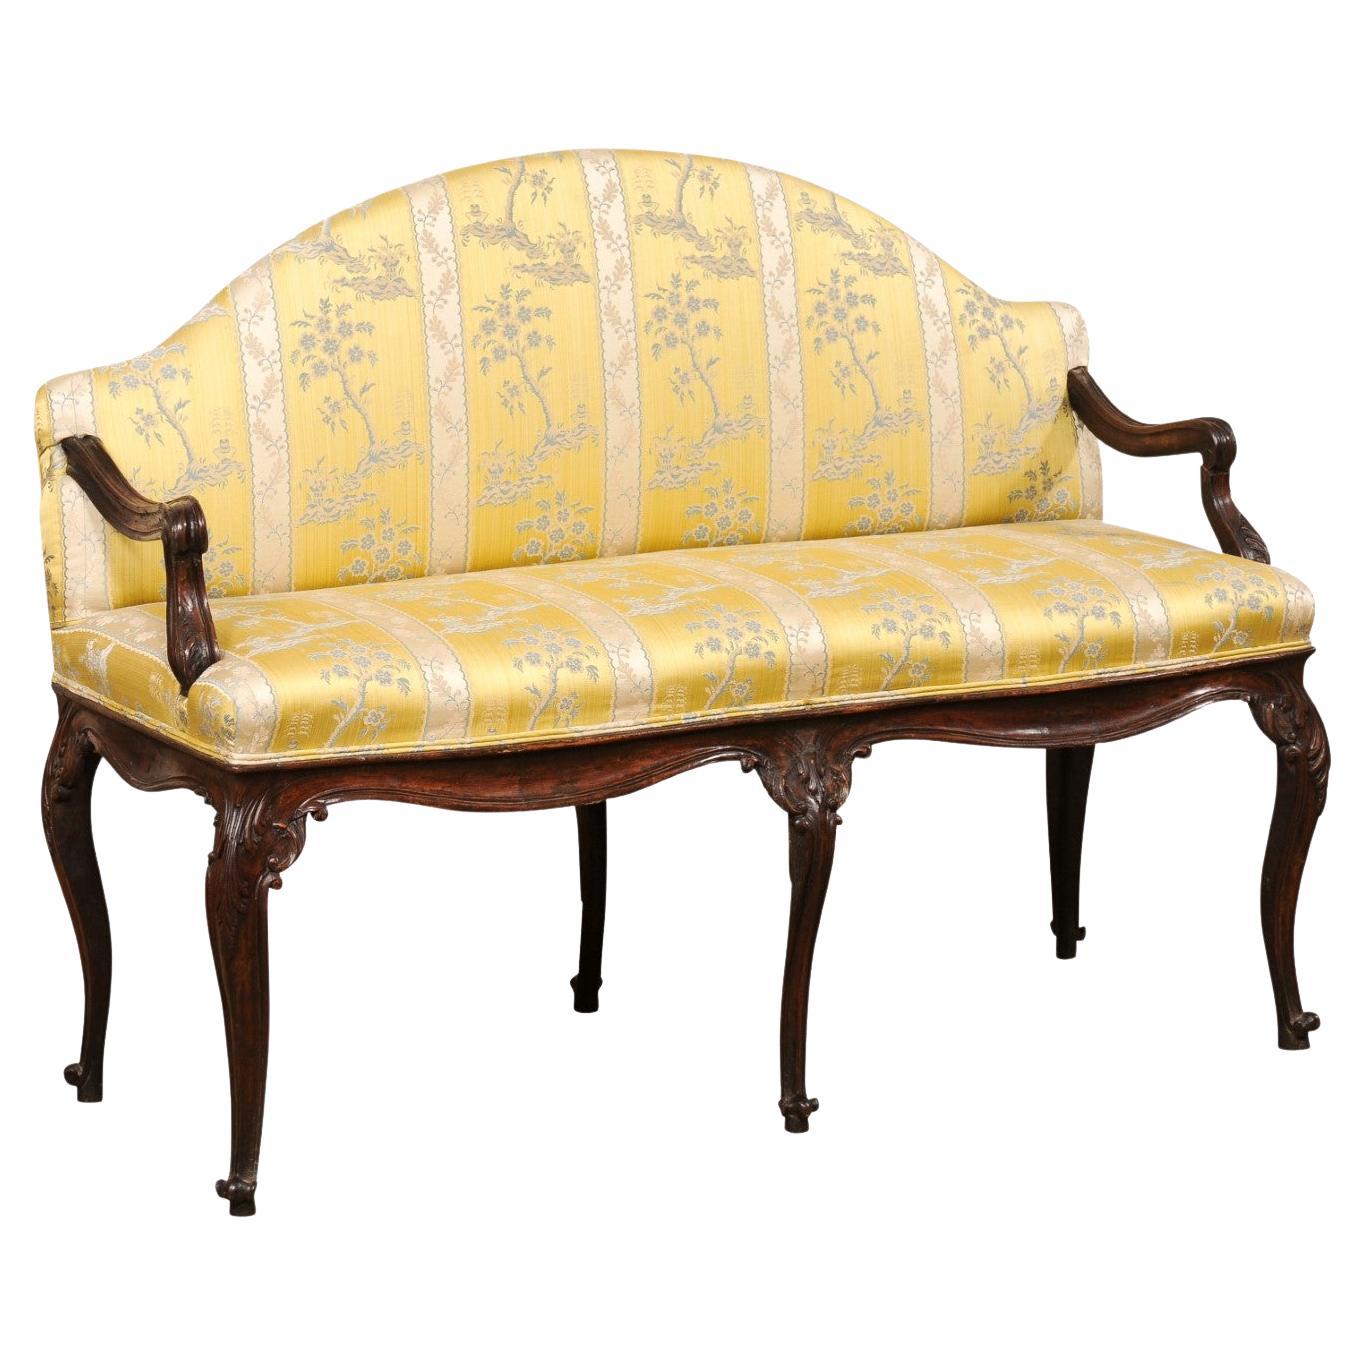 An Italian Carved-Wood & Upholstered Settee, Turn of 18th/19th Century For Sale